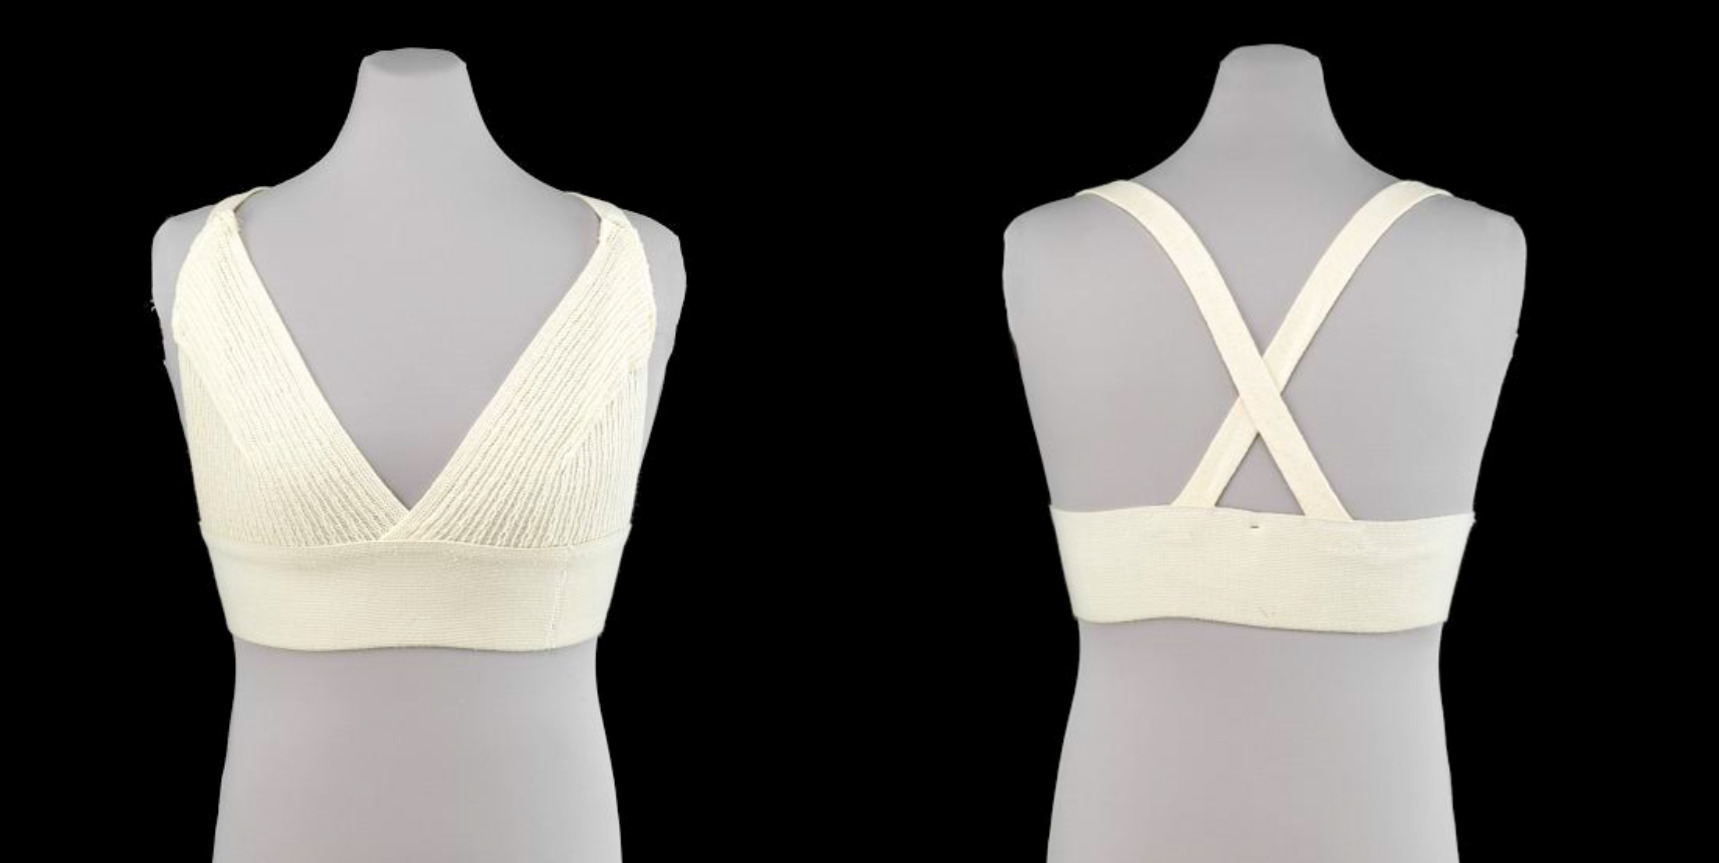 The First Jogbra Was Made by Sewing Together Two Men's Athletic Supporters, At the Smithsonian